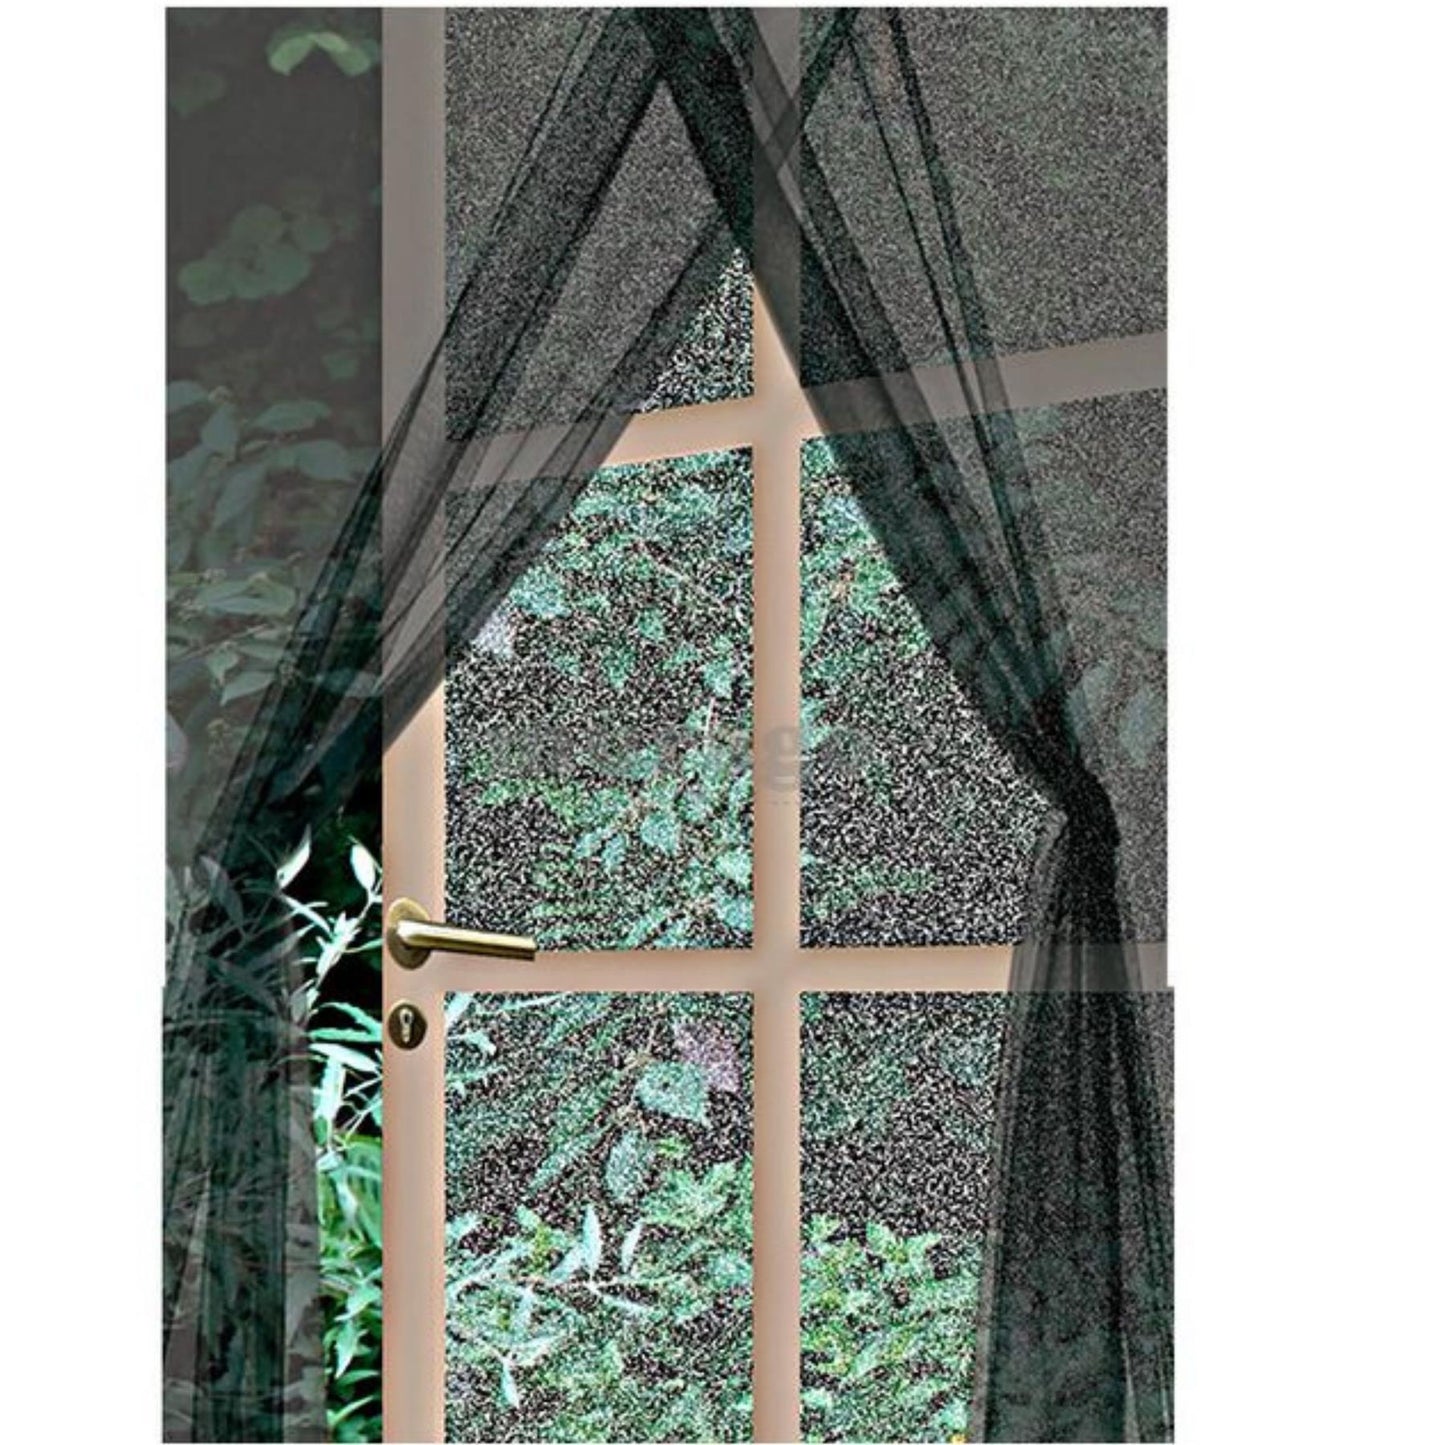 Anti Mosquito Door Curtain & Mesh Guard by GEEZY - UKBuyZone